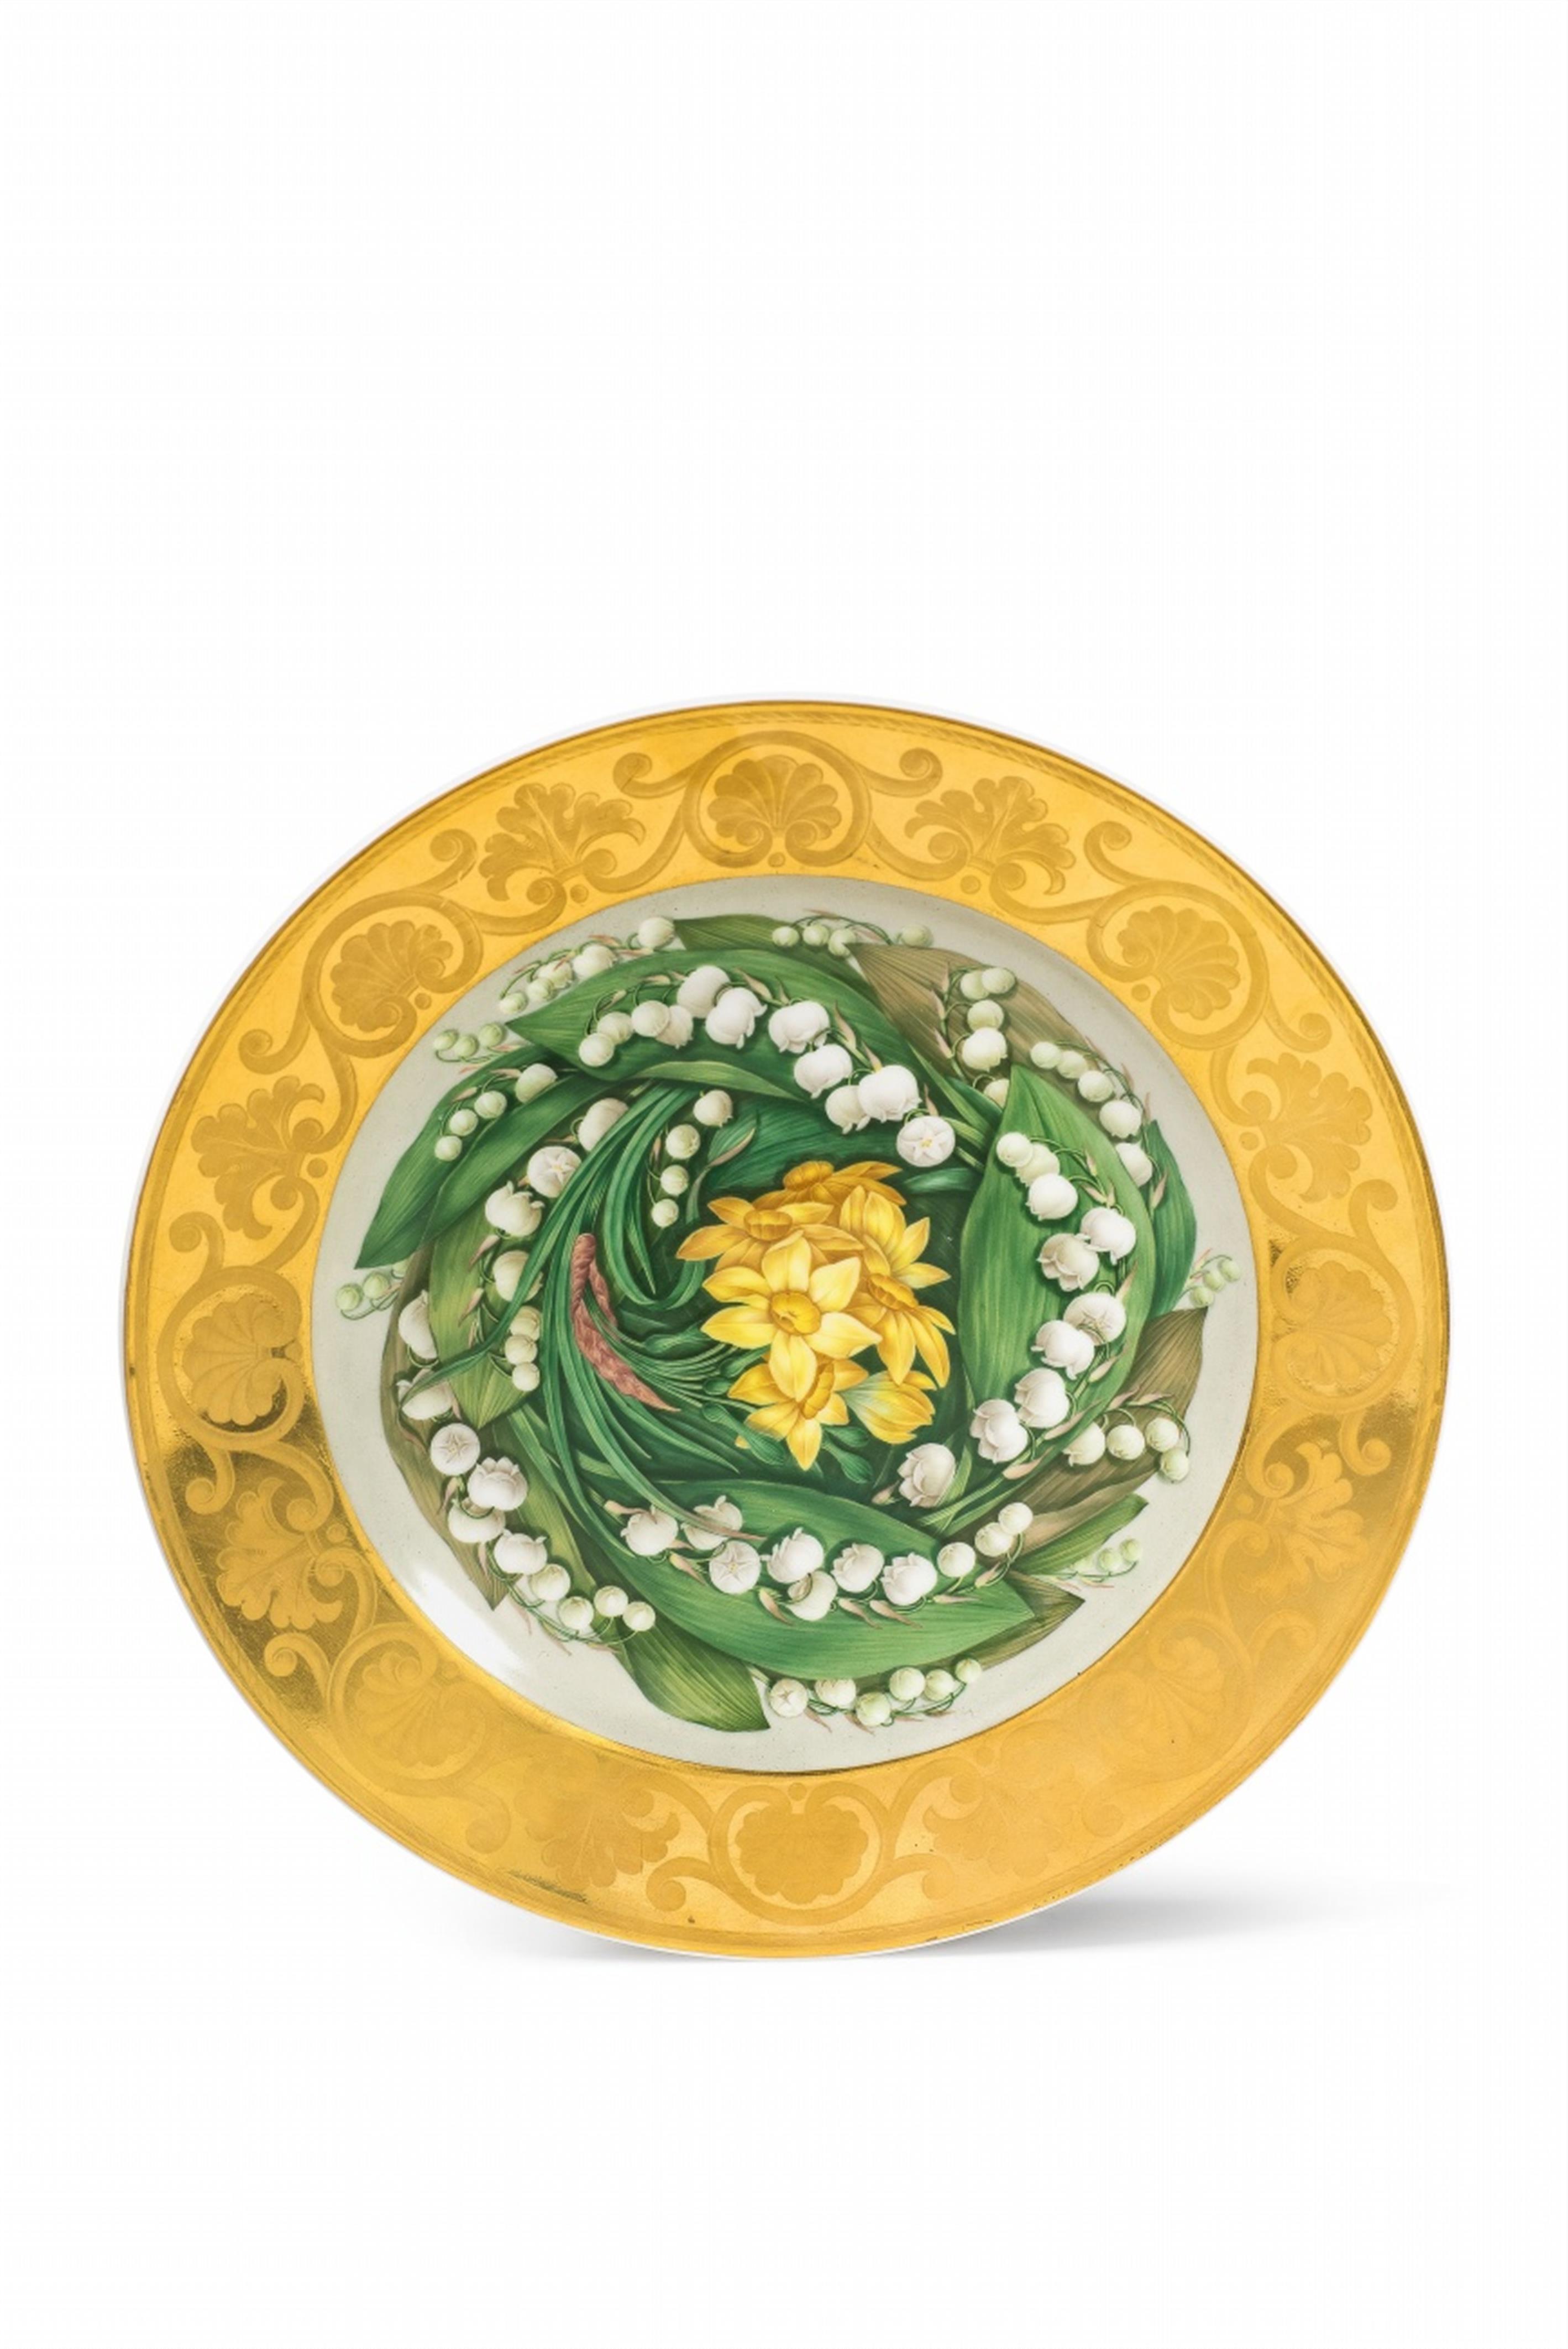 A Berlin KPM porcelain plate with lily of the valley and narcissi - image-1